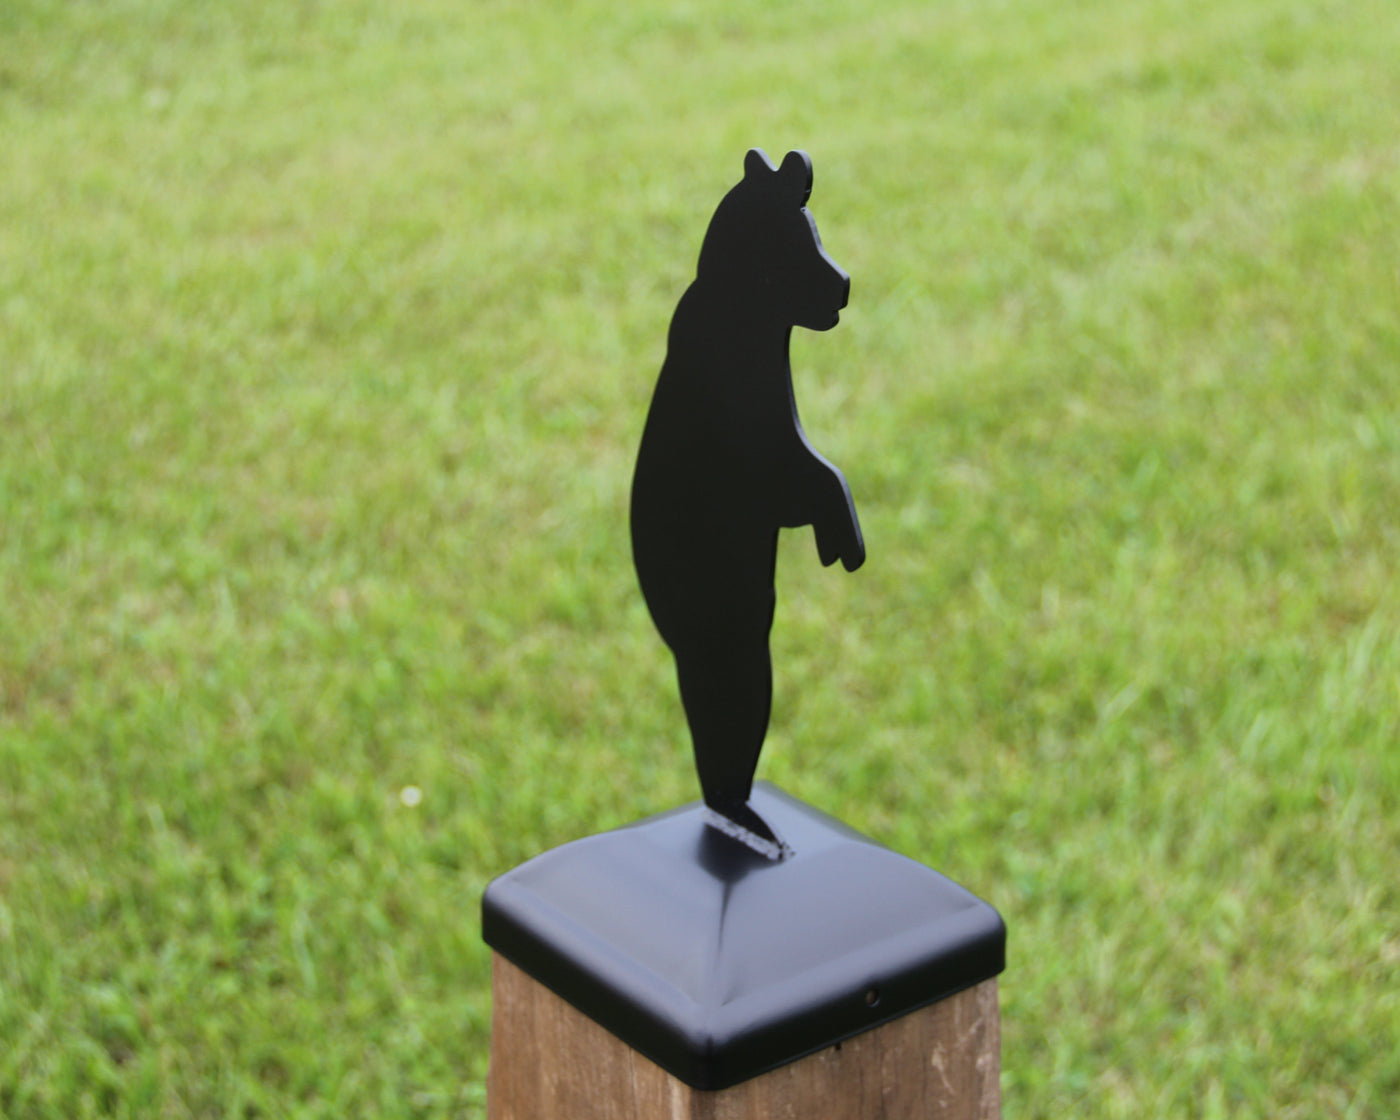 6x6 Standing Bear Post Cap - Madison Iron and Wood - Post Cap - metal outdoor decor - Steel deocrations - american made products - veteran owned business products - fencing decorations - fencing supplies - custom wall decorations - personalized wall signs - steel - decorative post caps - steel post caps - metal post caps - brackets - structural brackets - home improvement - easter - easter decorations - easter gift - easter yard decor